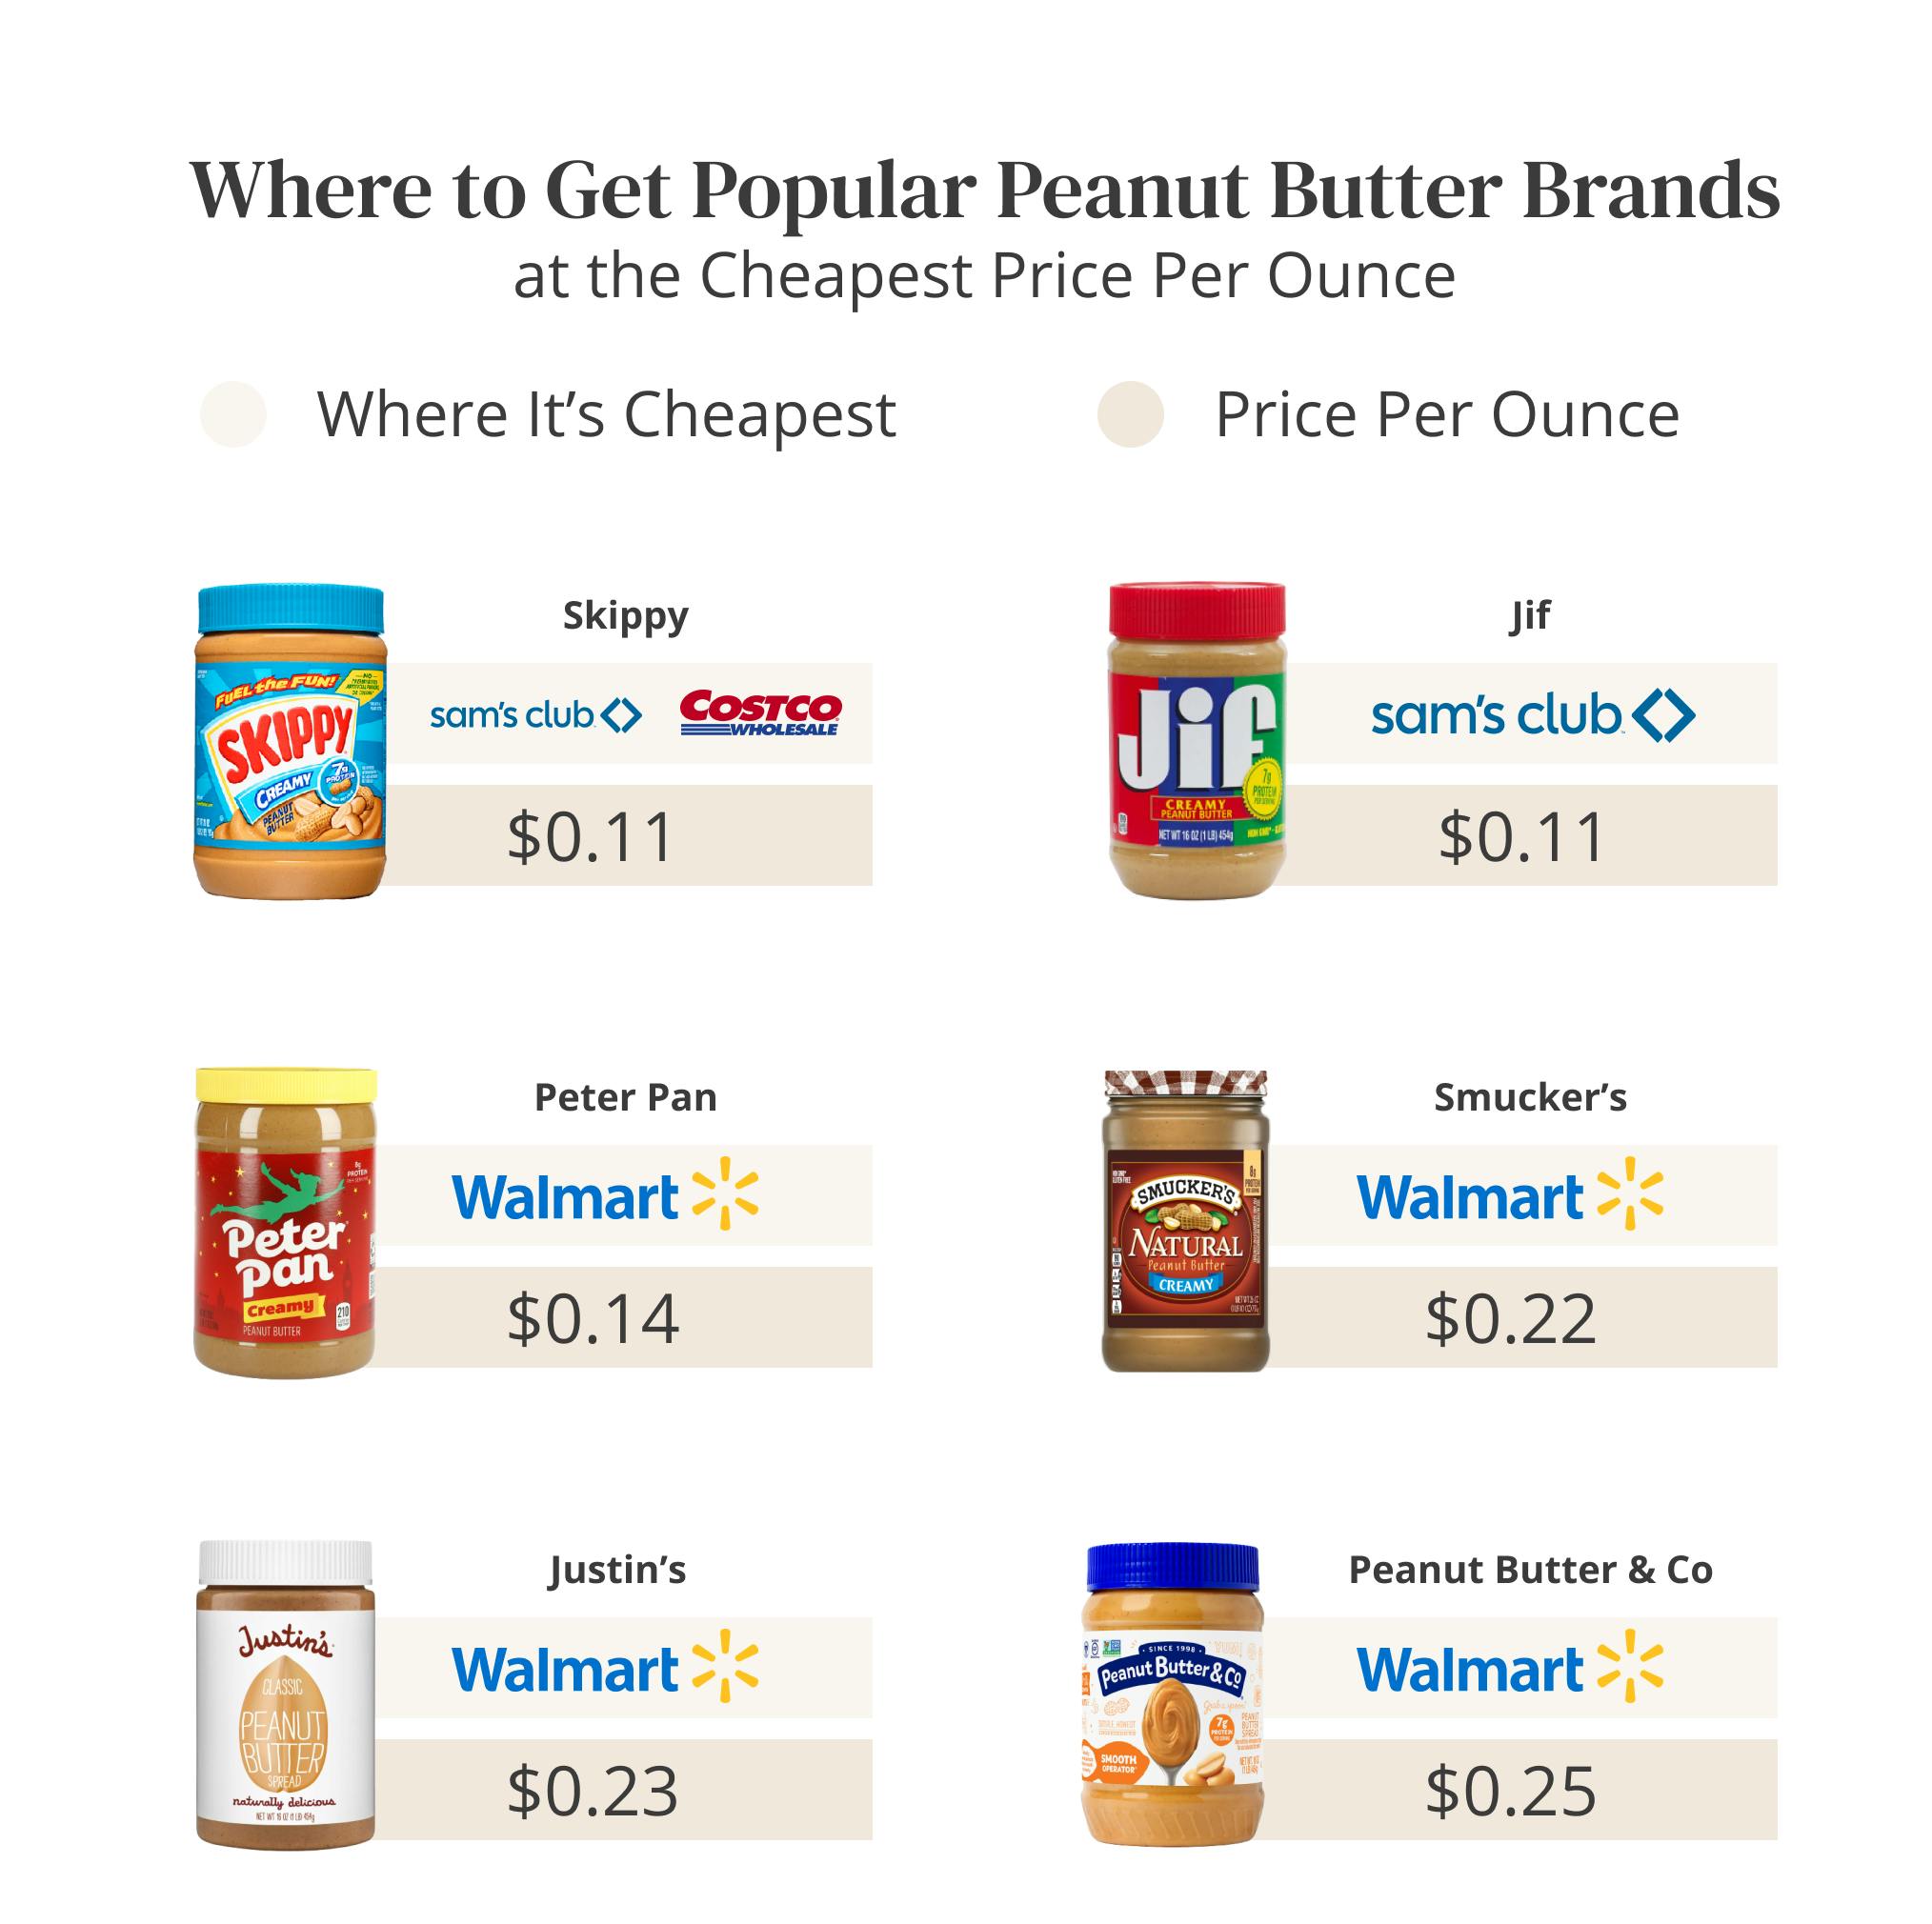 peanut-butter-cost-where-to-get-popular-brands